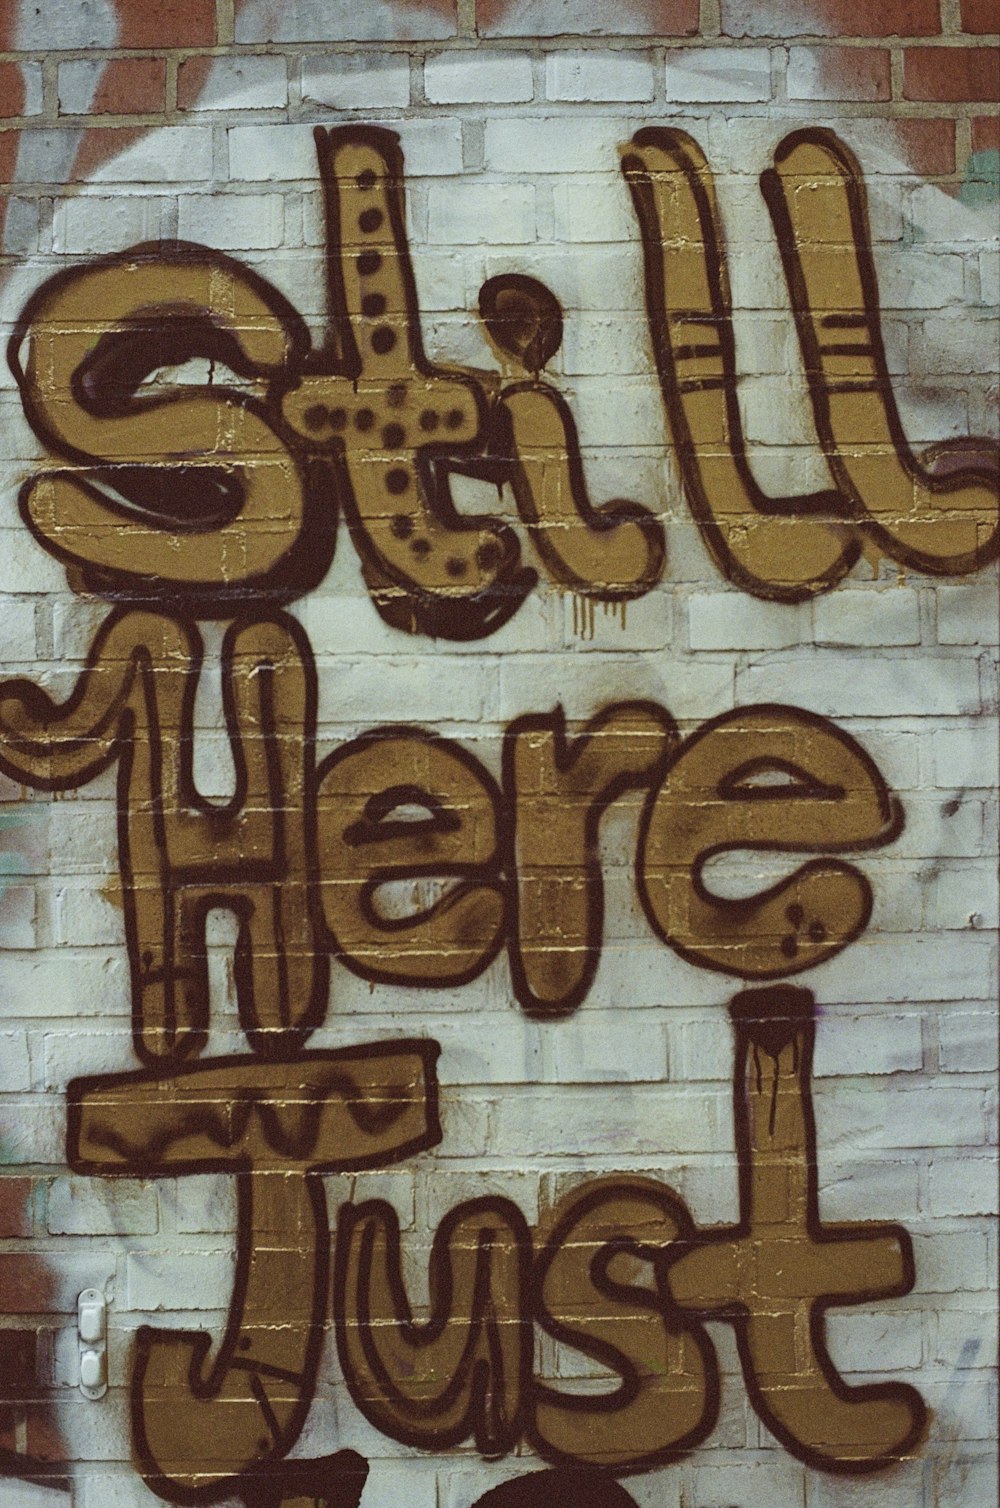 graffiti on a brick wall that says sell here just